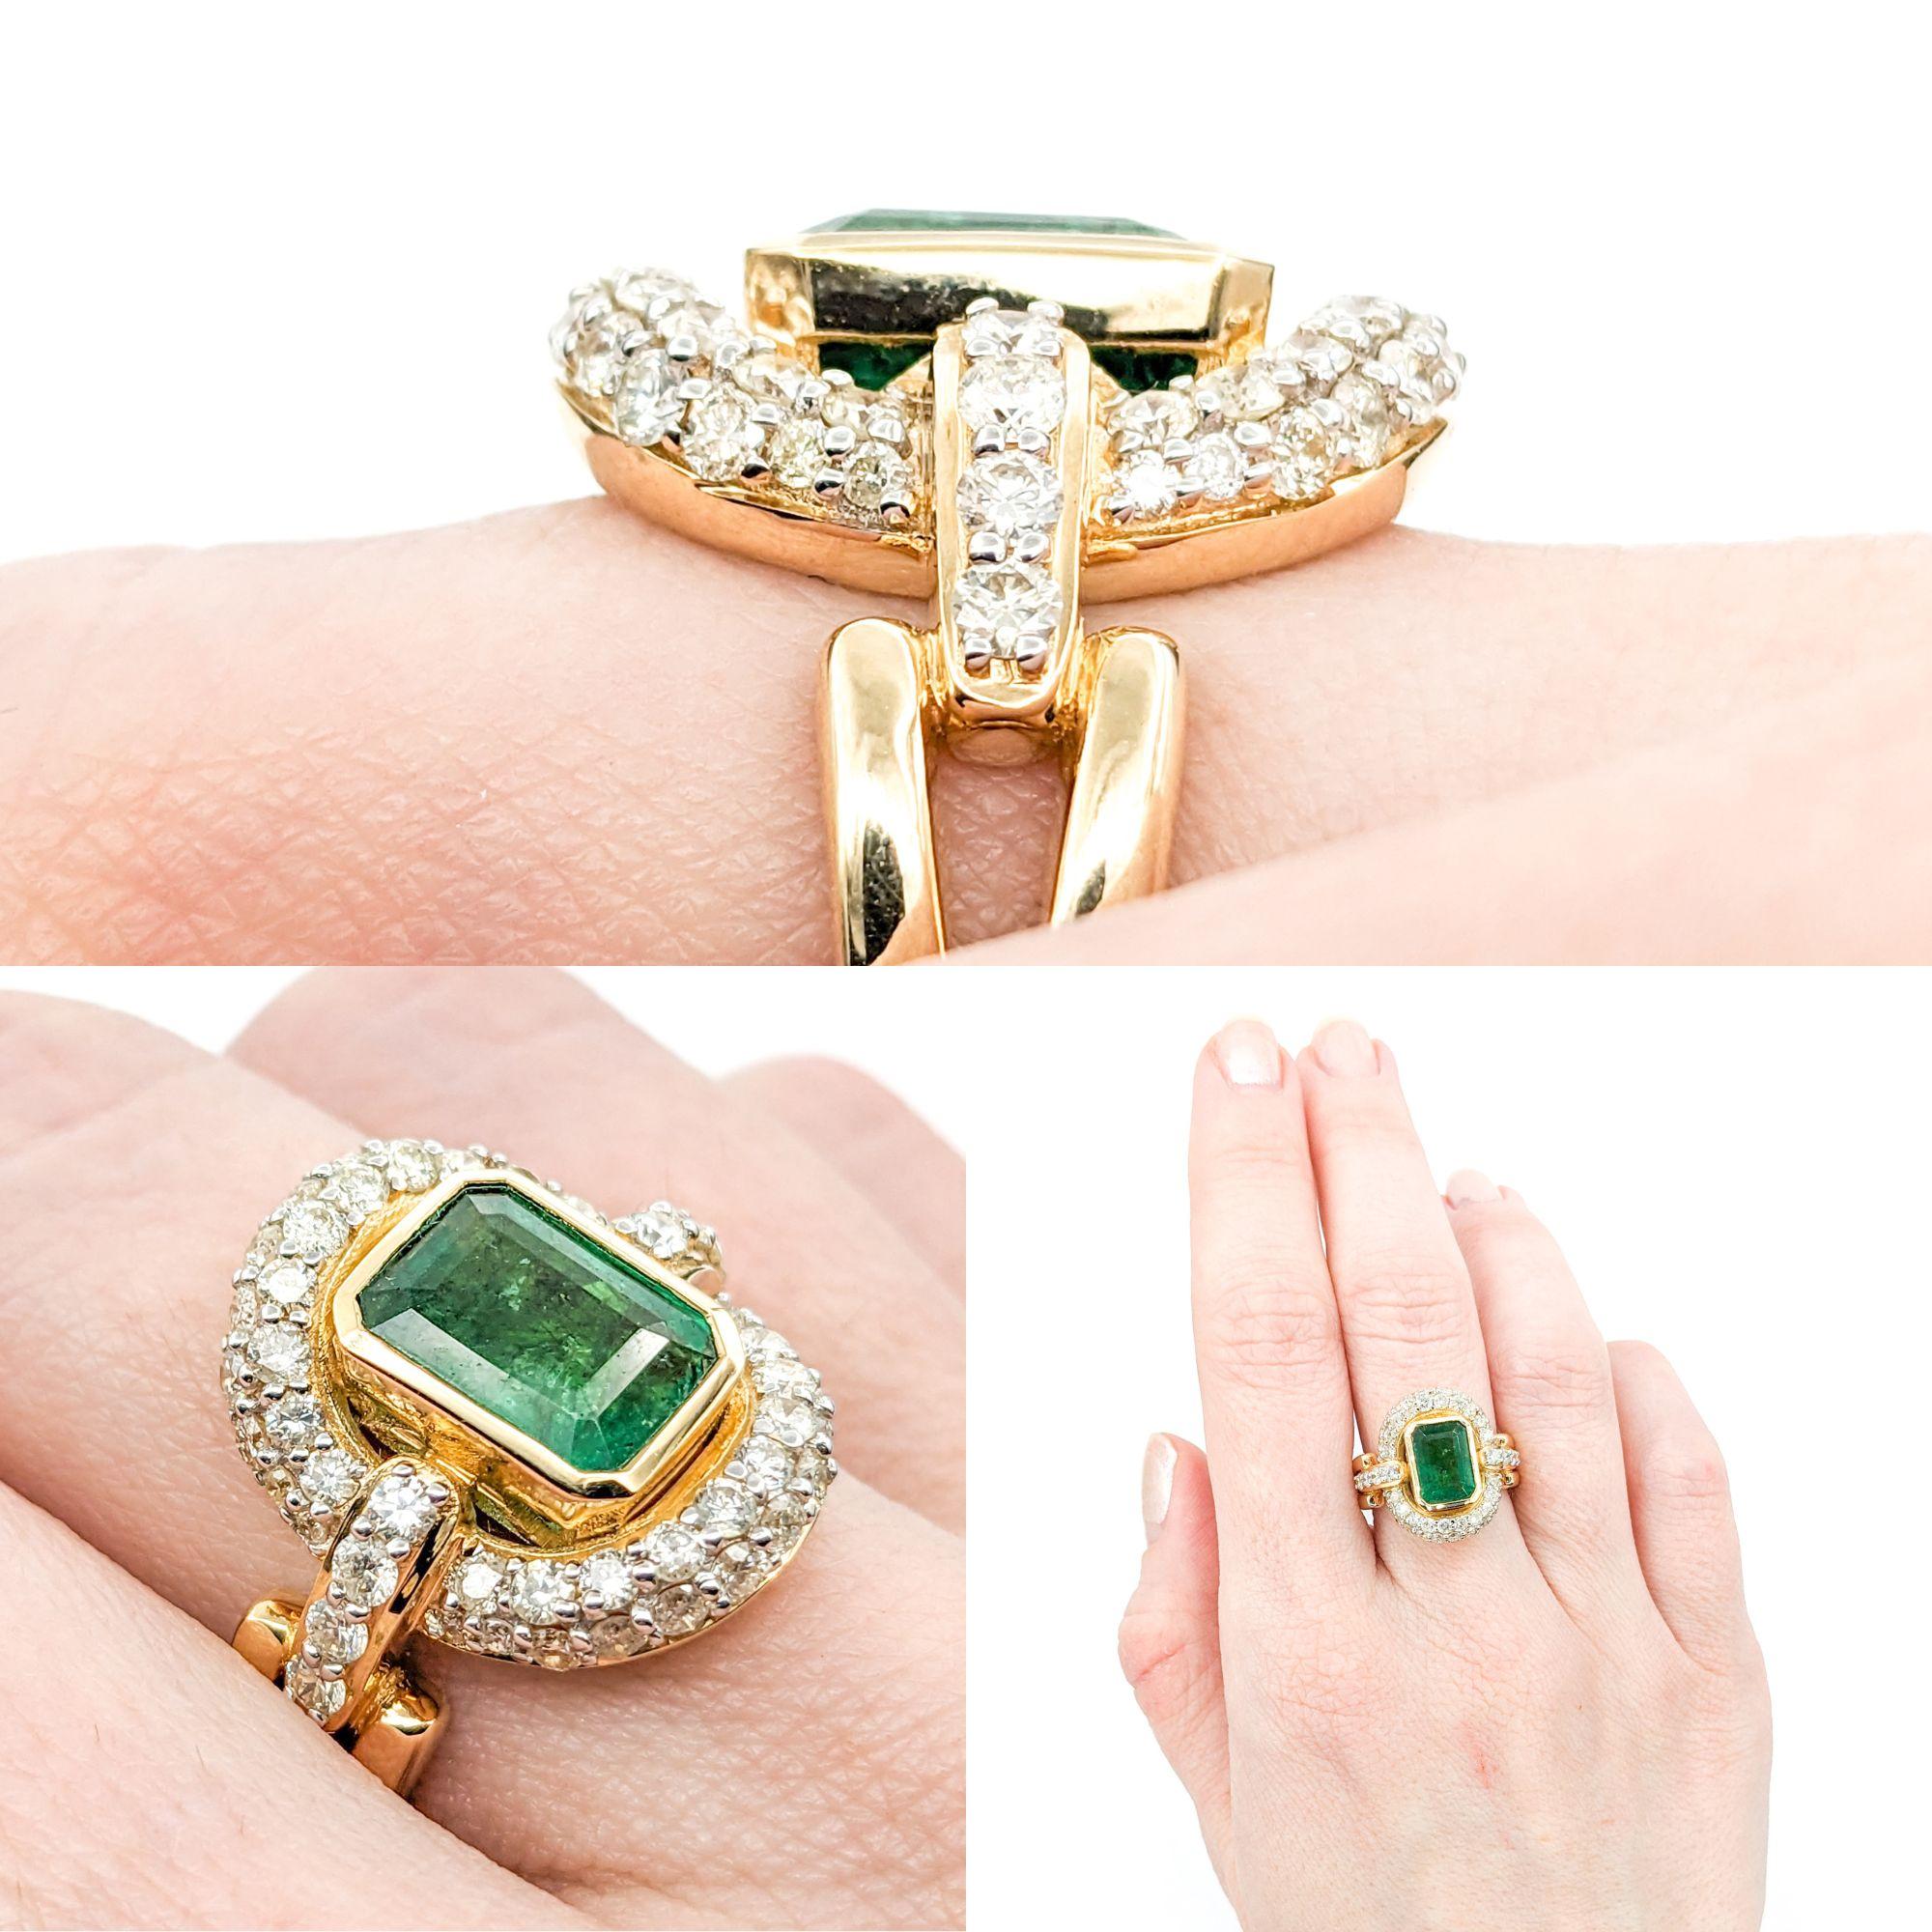 2.36ct Emerald & 1.21ctw Diamond Ring In Yellow Gold

Introducing this beautiful natural emerald Ring crafted in 14k Yellow Gold. This ring features deep green a 2.36ct emerald centerpiece. Further enhancing this ring are 1.21ctw of glittering round